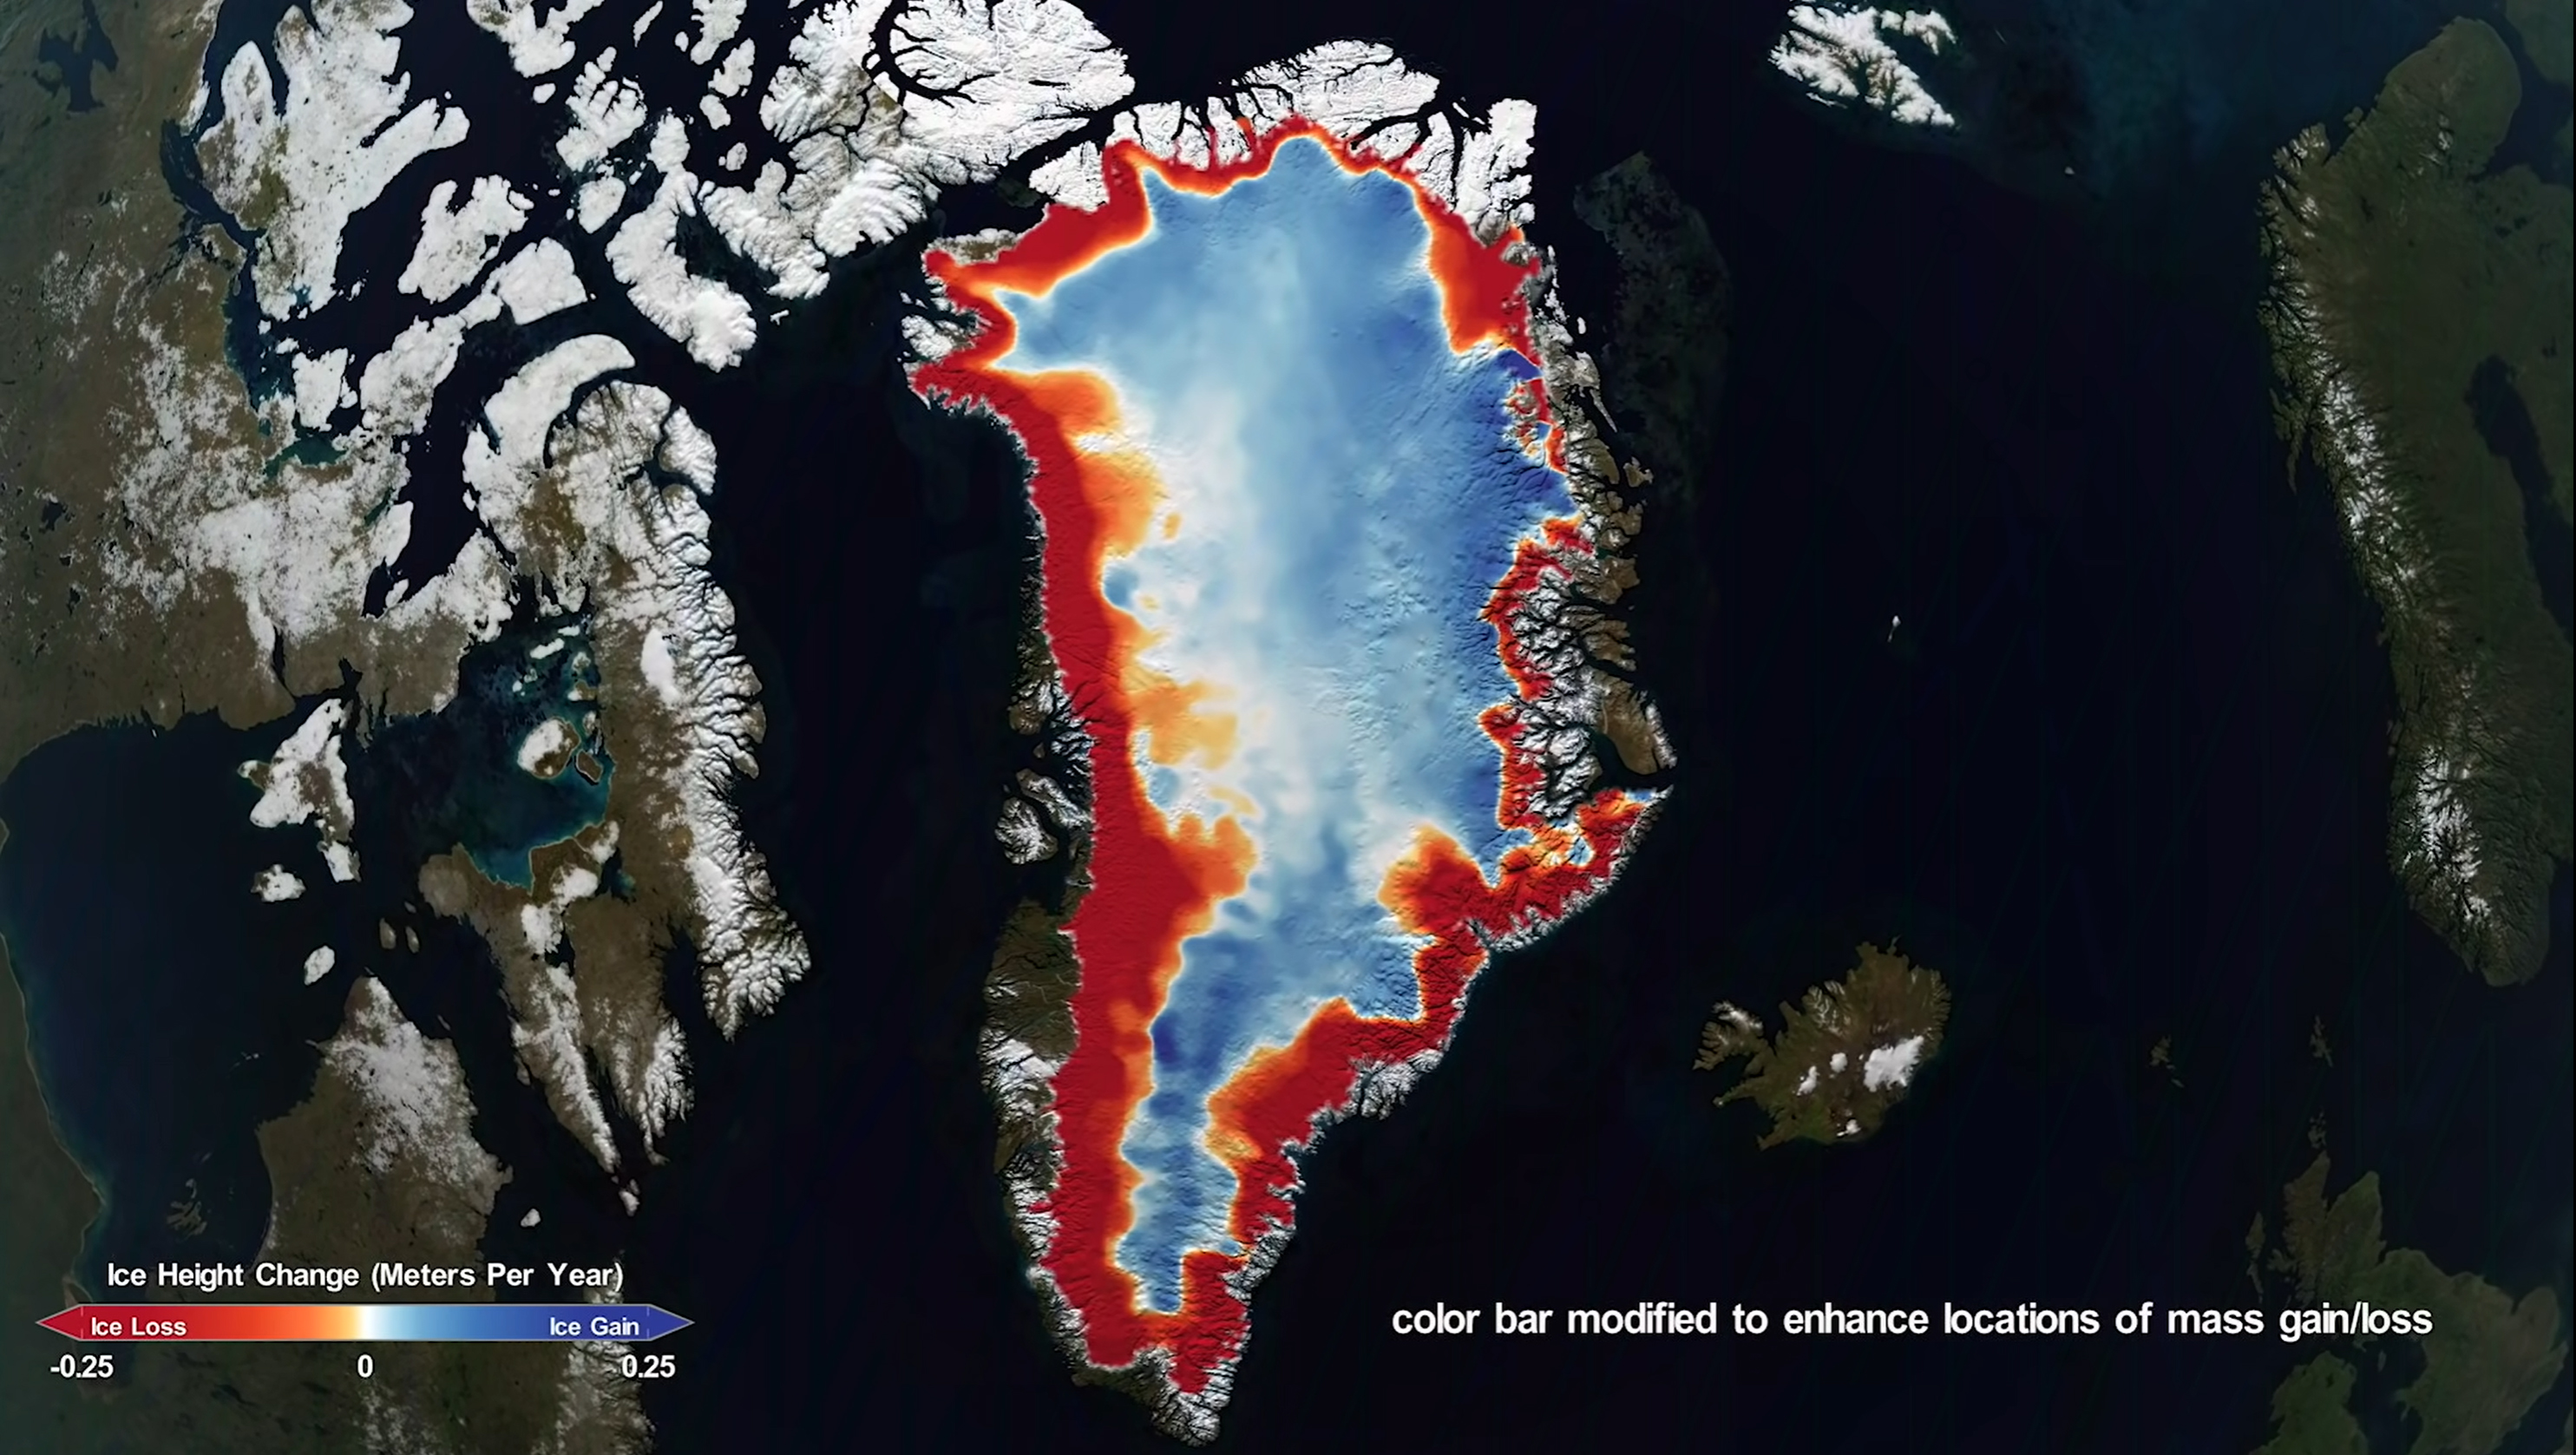 Change of ice in Greenland over 16 years marked in red for loss and blue for gain